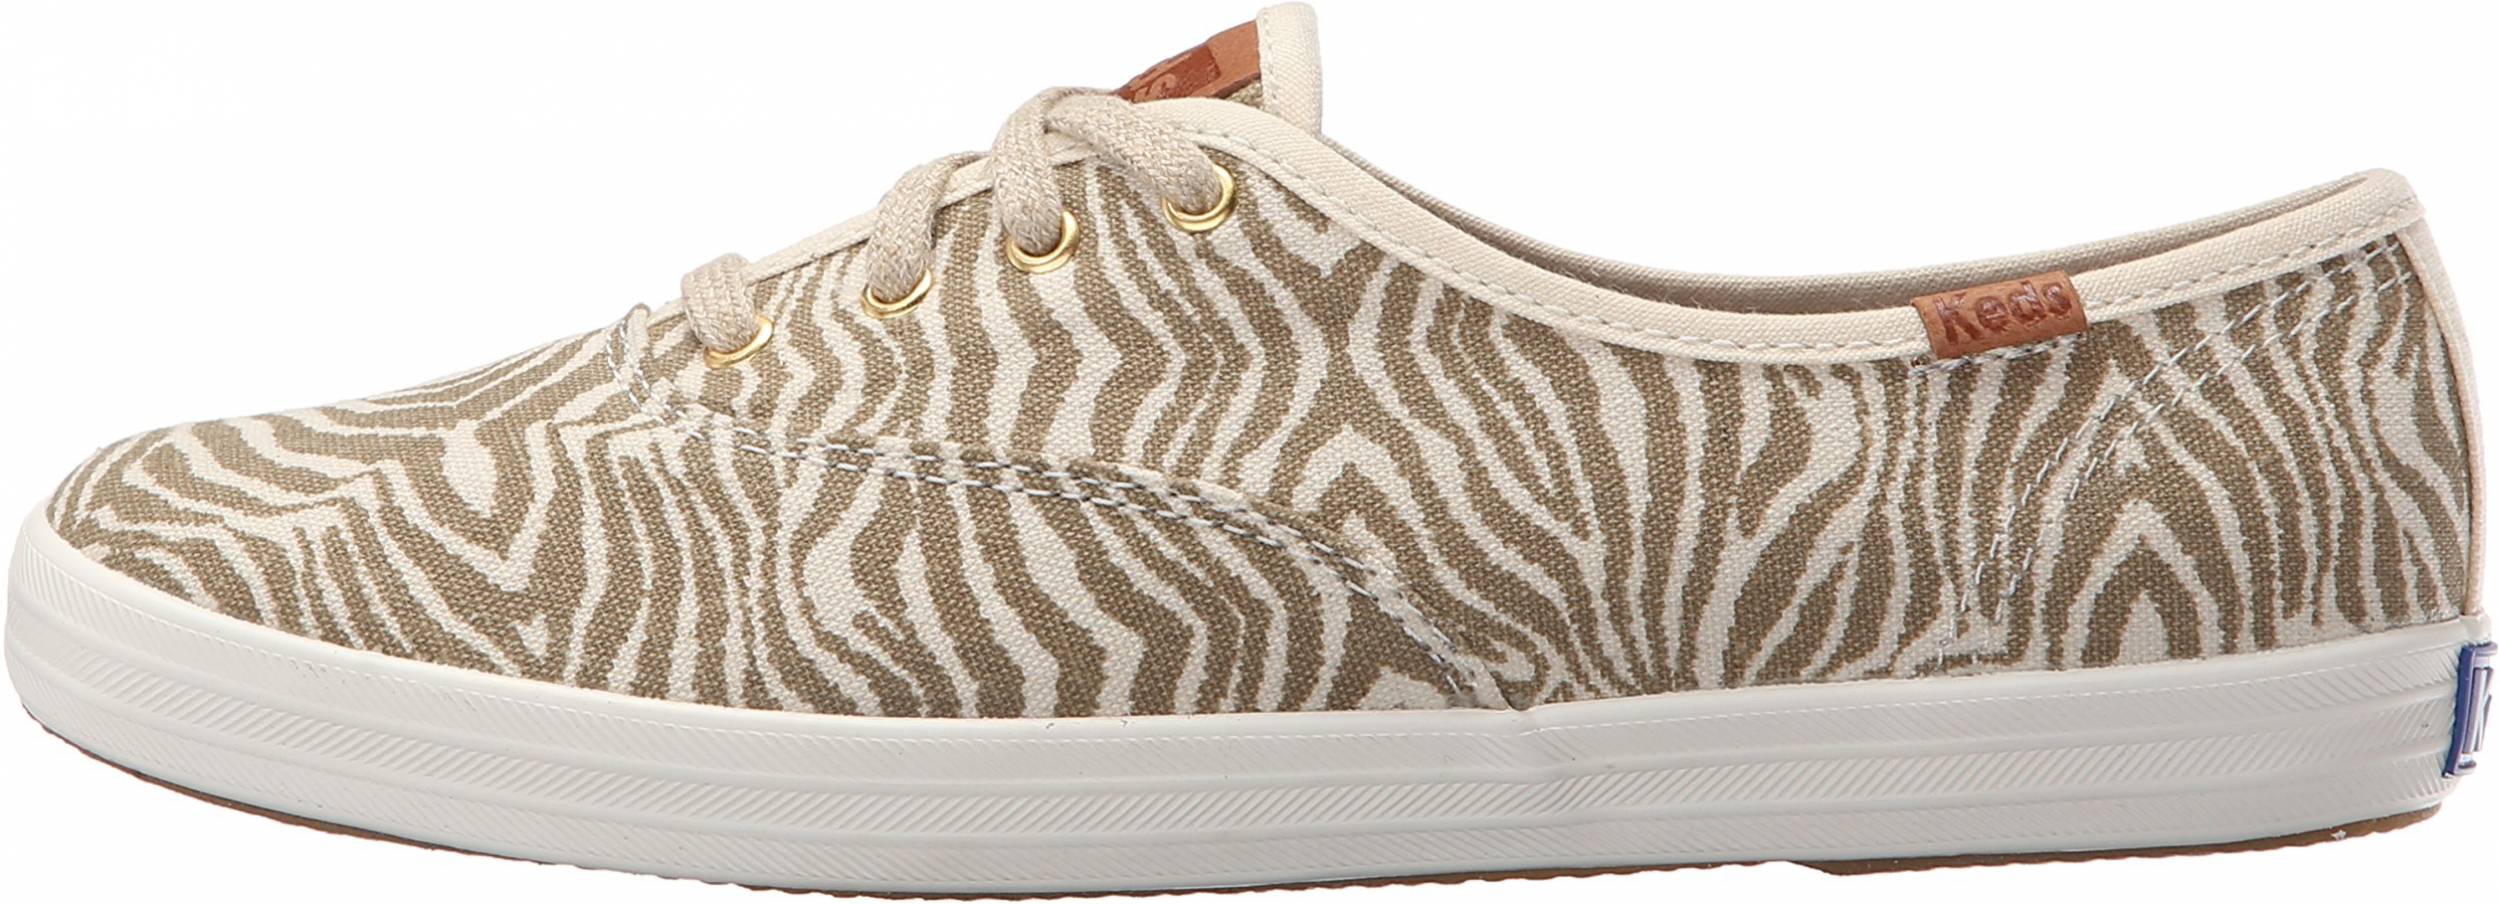 klon Stramme Fritid Keds Champion Animal sneakers in beige (only $24) | RunRepeat